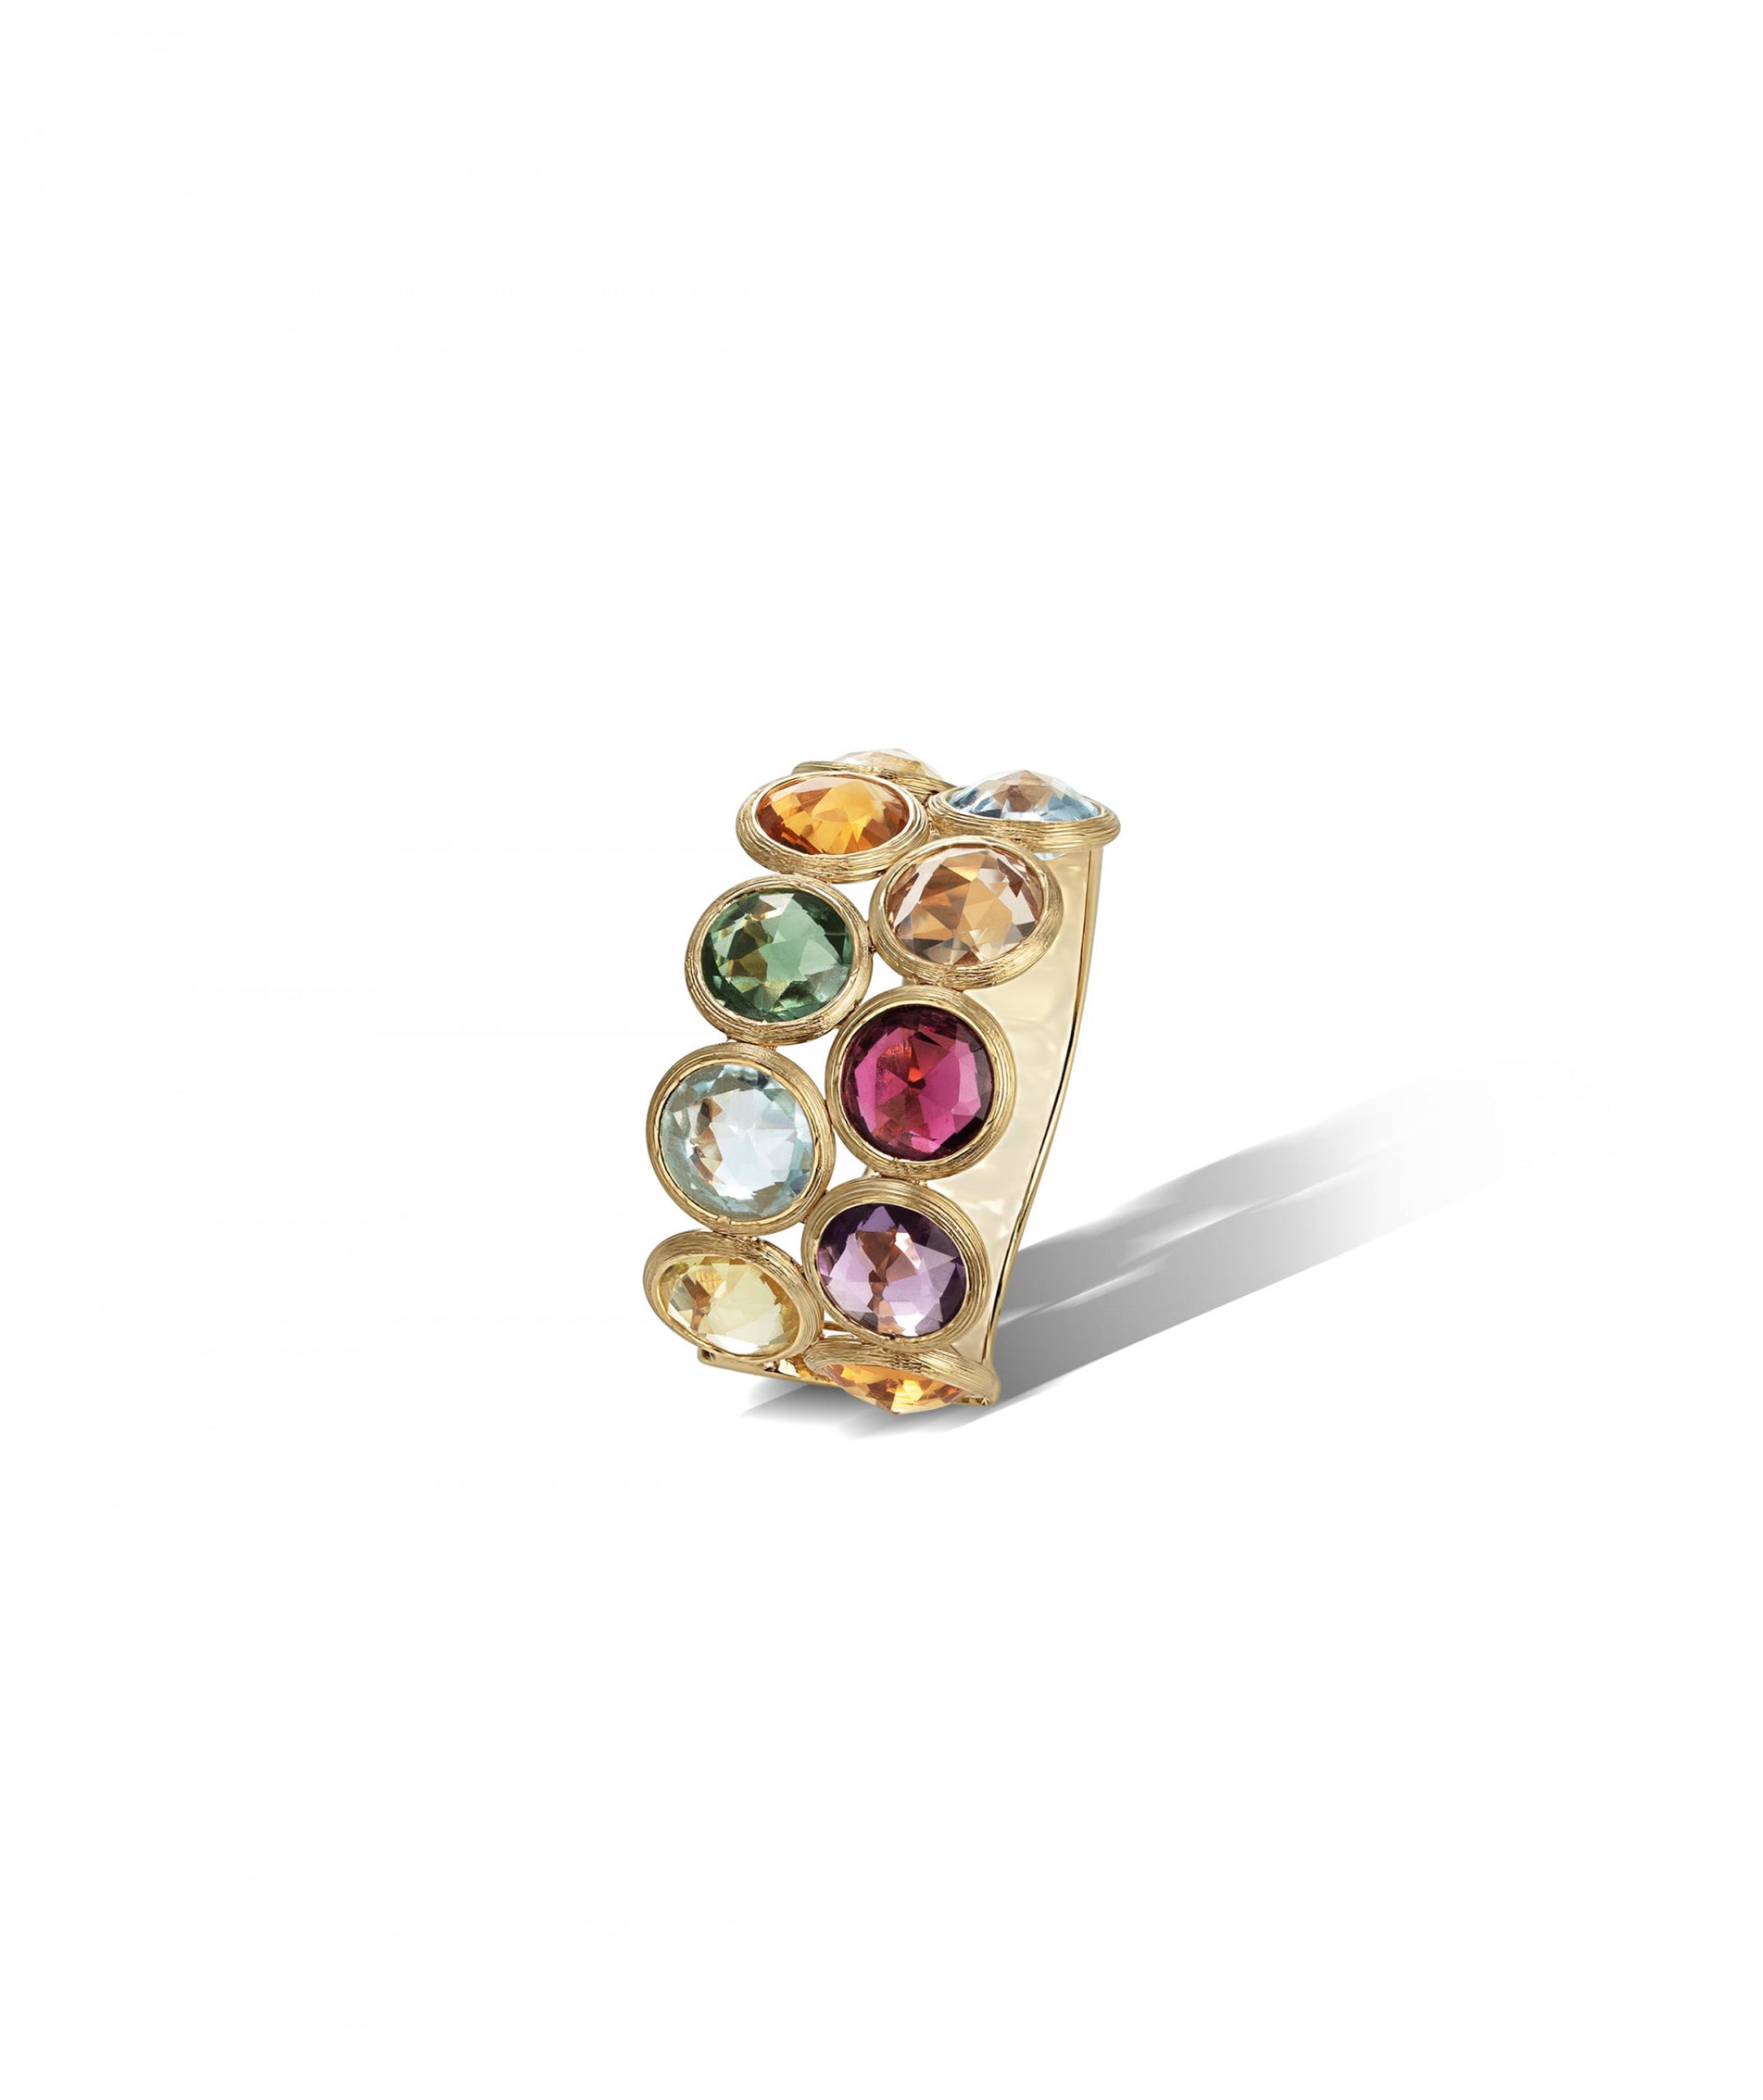 Jaipur Colour Ring in 18k Yellow Gold with Double Band of Multicoloured Gemstones - Orsini Jewellers NZ